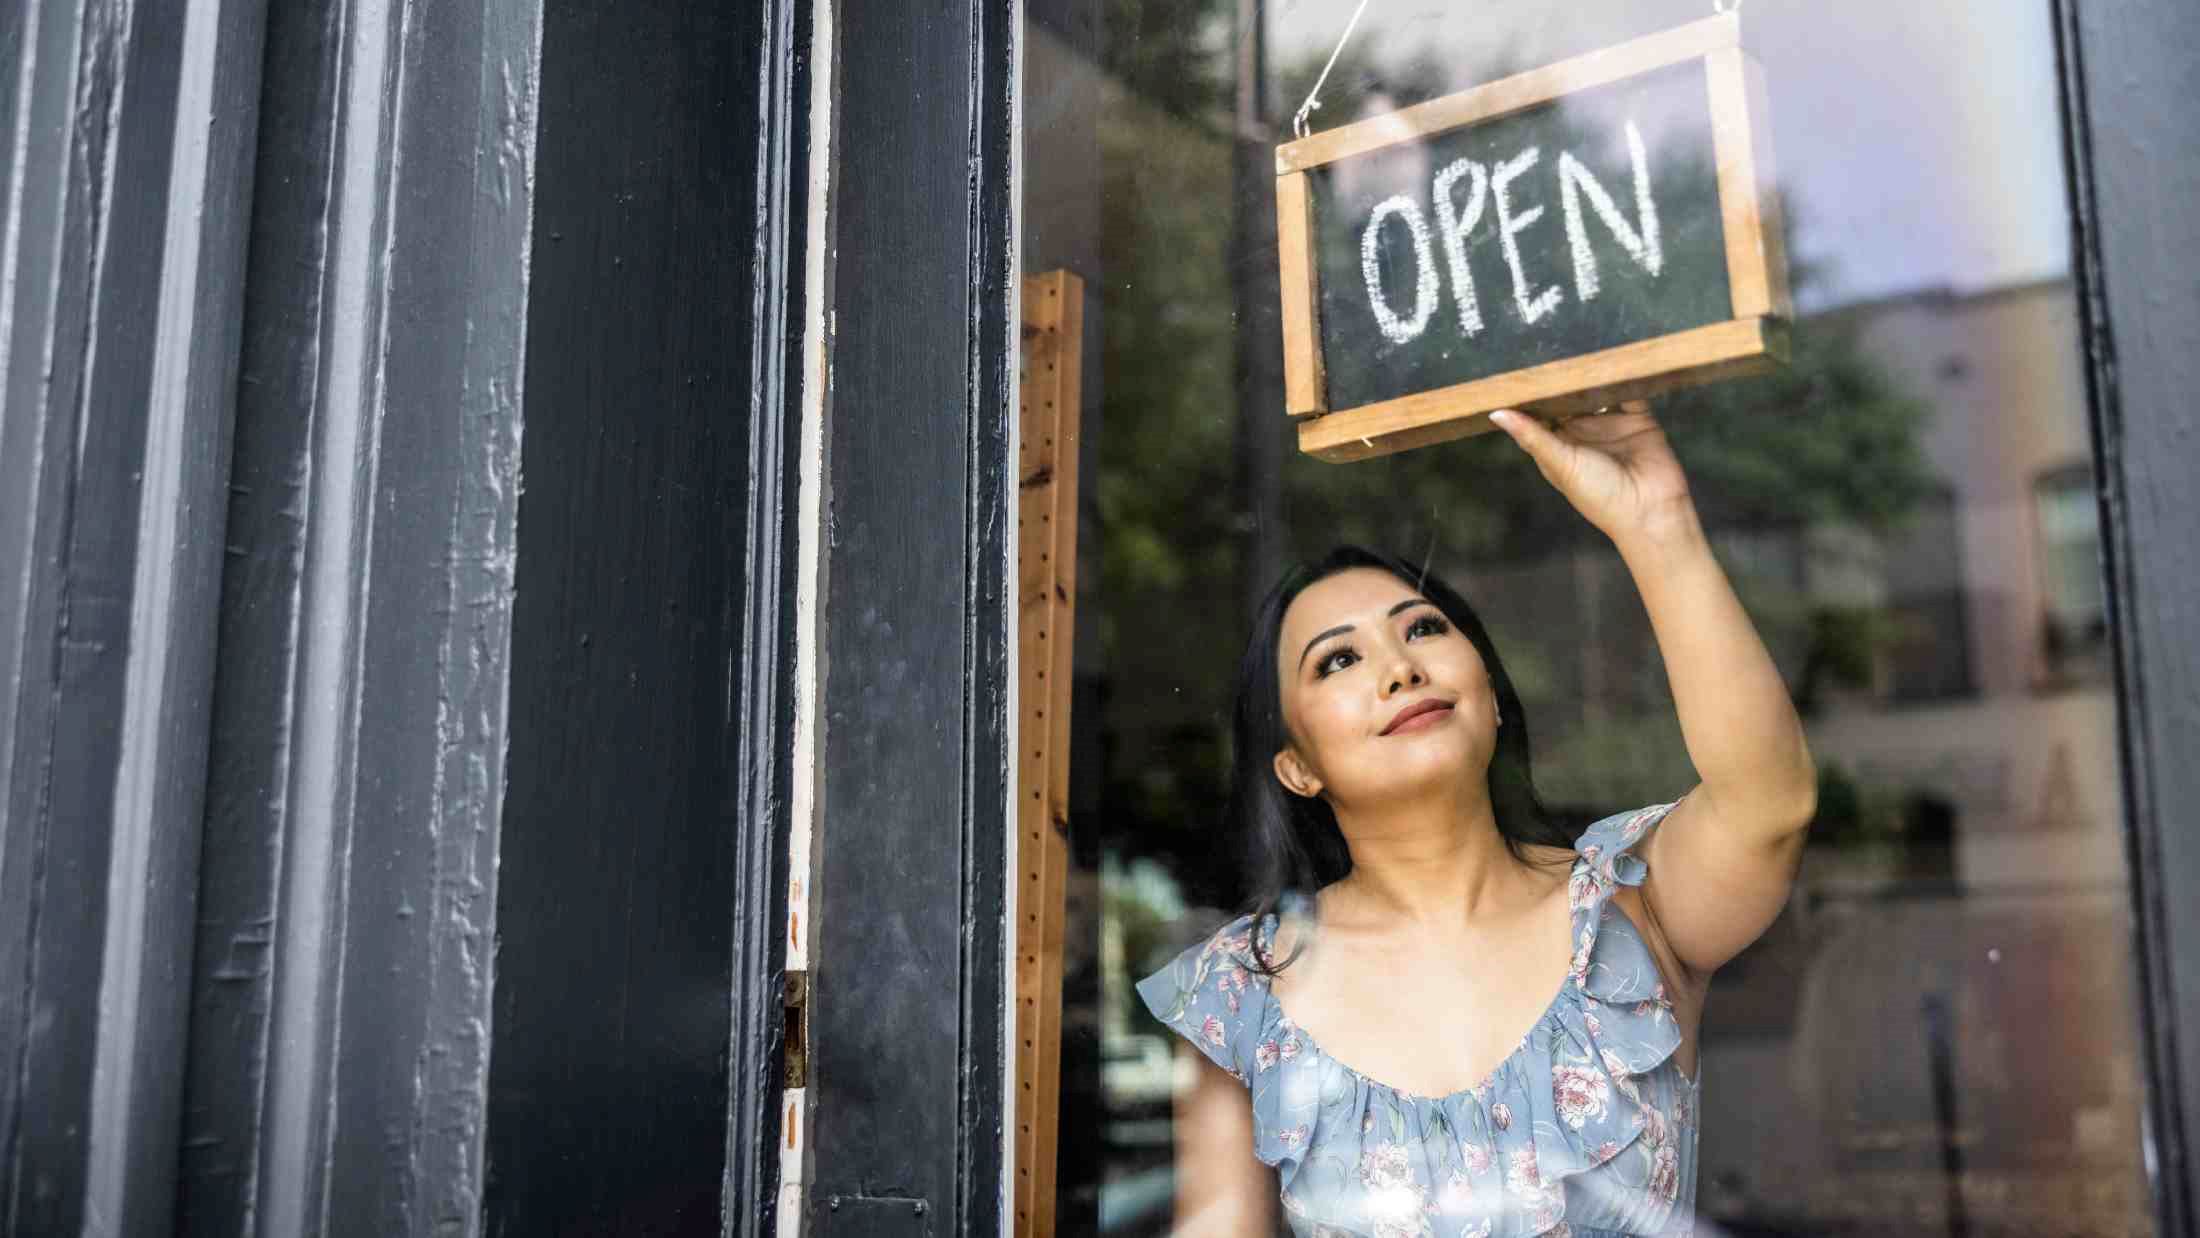 Female small business owner turning open sign in her store